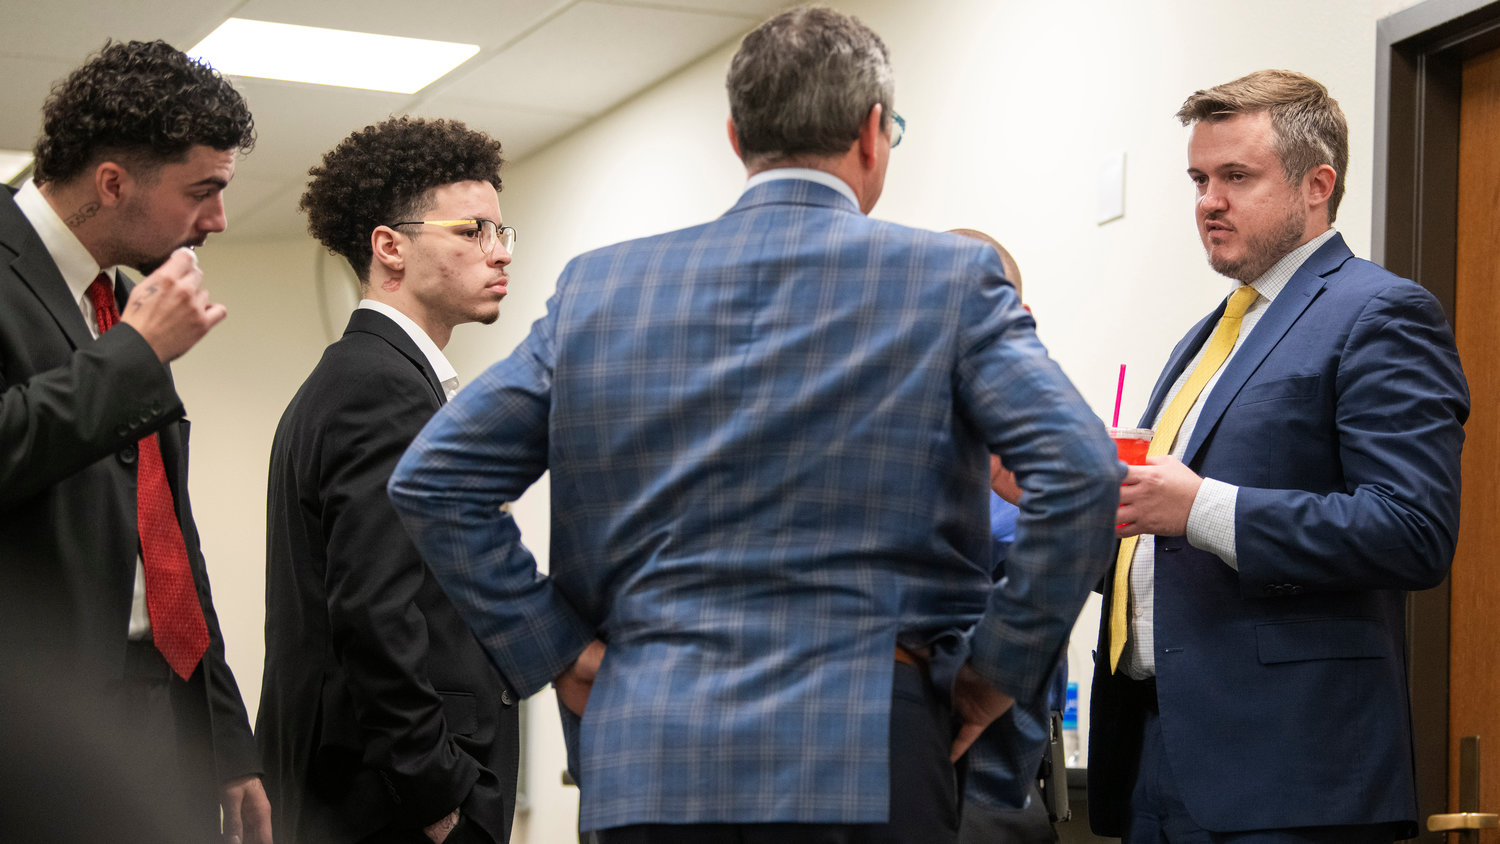 Lathan Echols and Joshua Darrow talk with legal counsel inside the Lewis County Law and Justice Center in Chehalis before a jury reached a not-guilty verdict on Thursday.